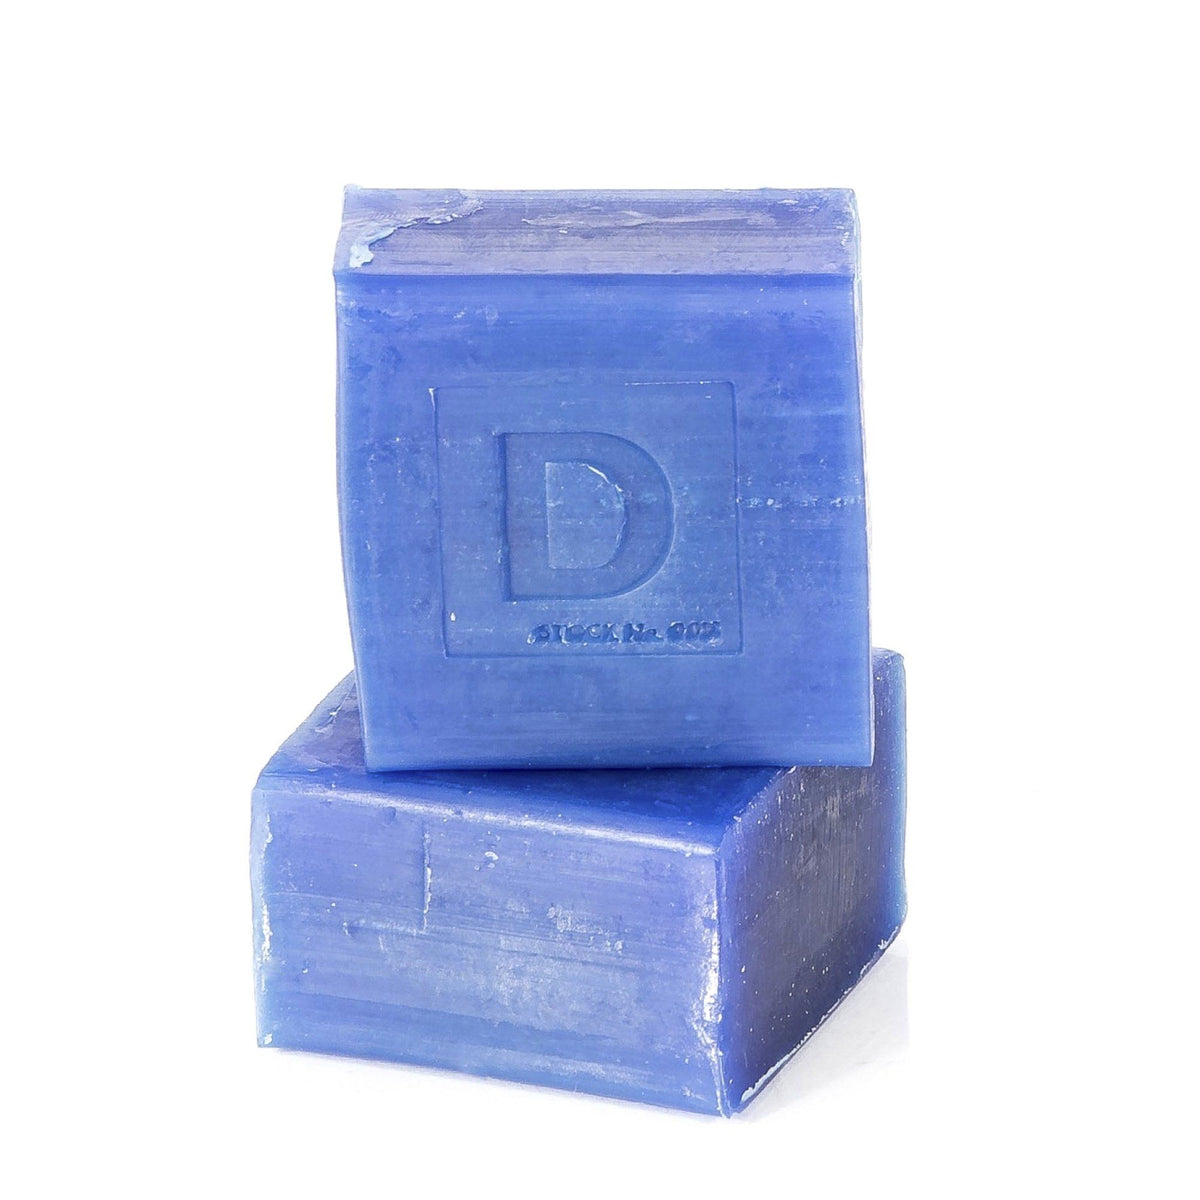 https://www.shopfendrihan.shop/wp-content/uploads/1691/38/be-inspired-and-look-through-our-duke-cannon-supply-co-cold-shower-cooling-soap-cubes-discontinued-collection-buy-now_2.jpg